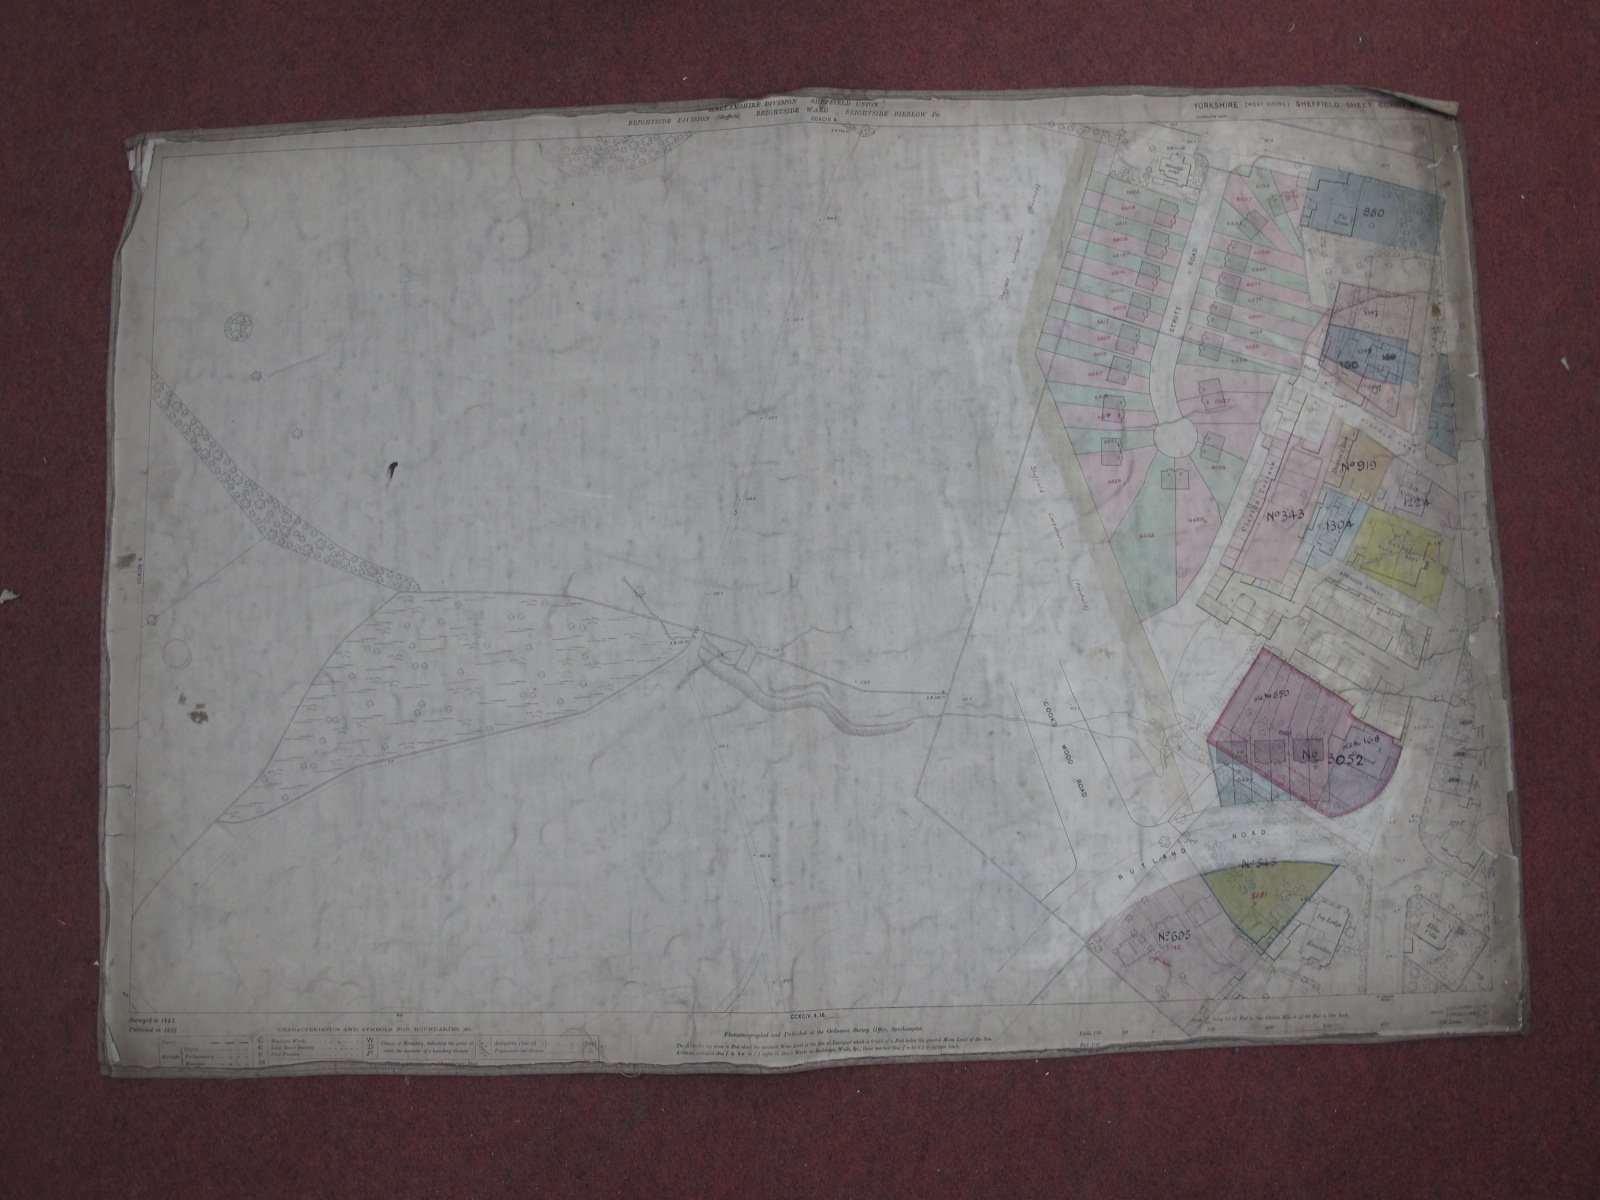 Sheffield Maps, Brightside, Burngreave - some dates noted, 1893, 1890, various scales, dirty and - Image 7 of 10